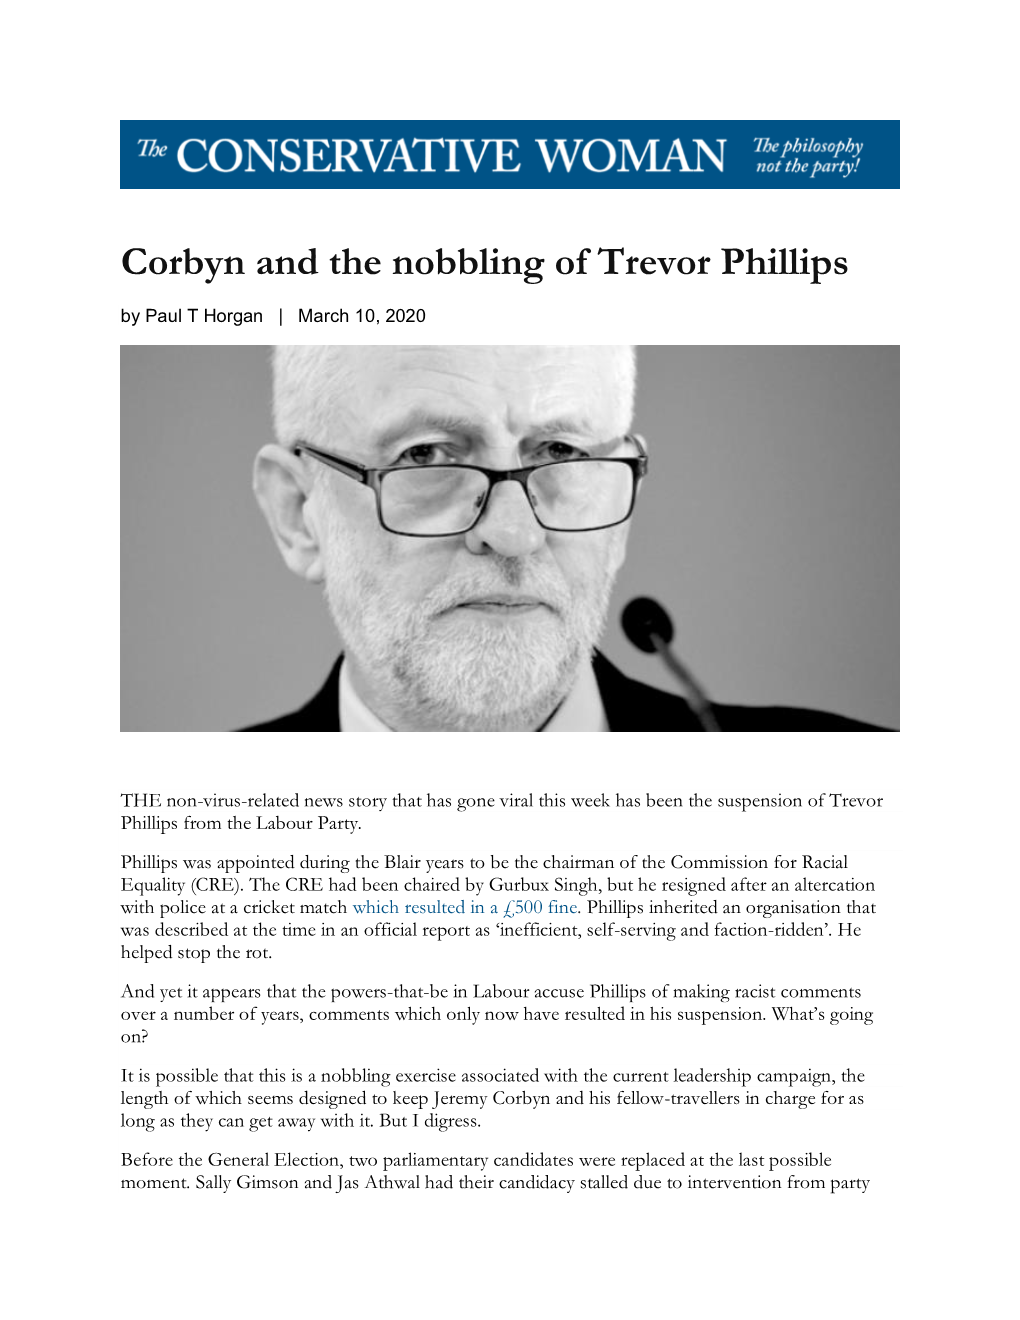 Corbyn and the Nobbling of Trevor Phillips by Paul T Horgan | March 10, 2020